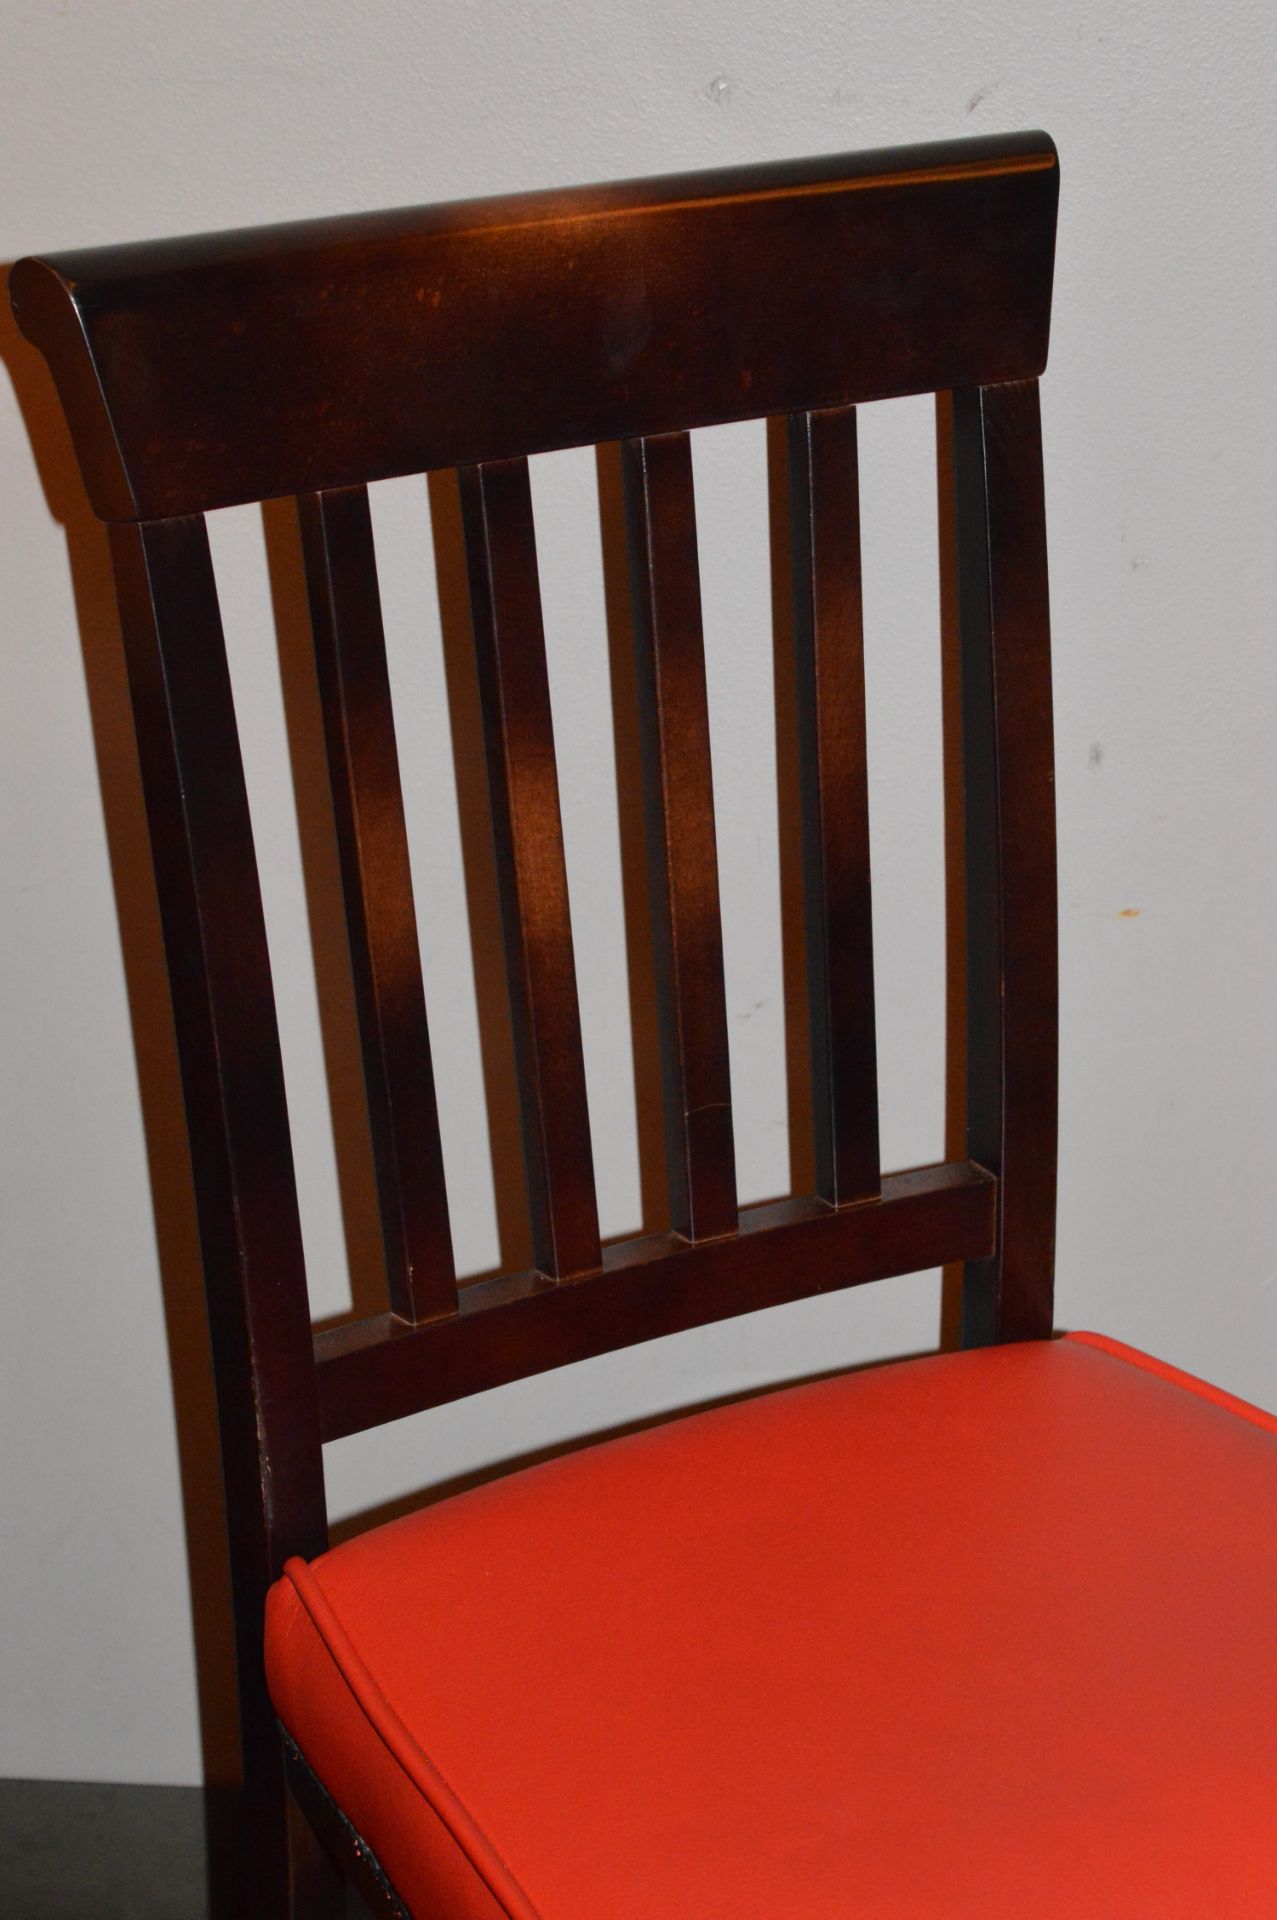 4 x High Back Dining Chairs With Red Leather Seat Cushions and Studded Detail - Hardwoord Frames - - Image 3 of 5